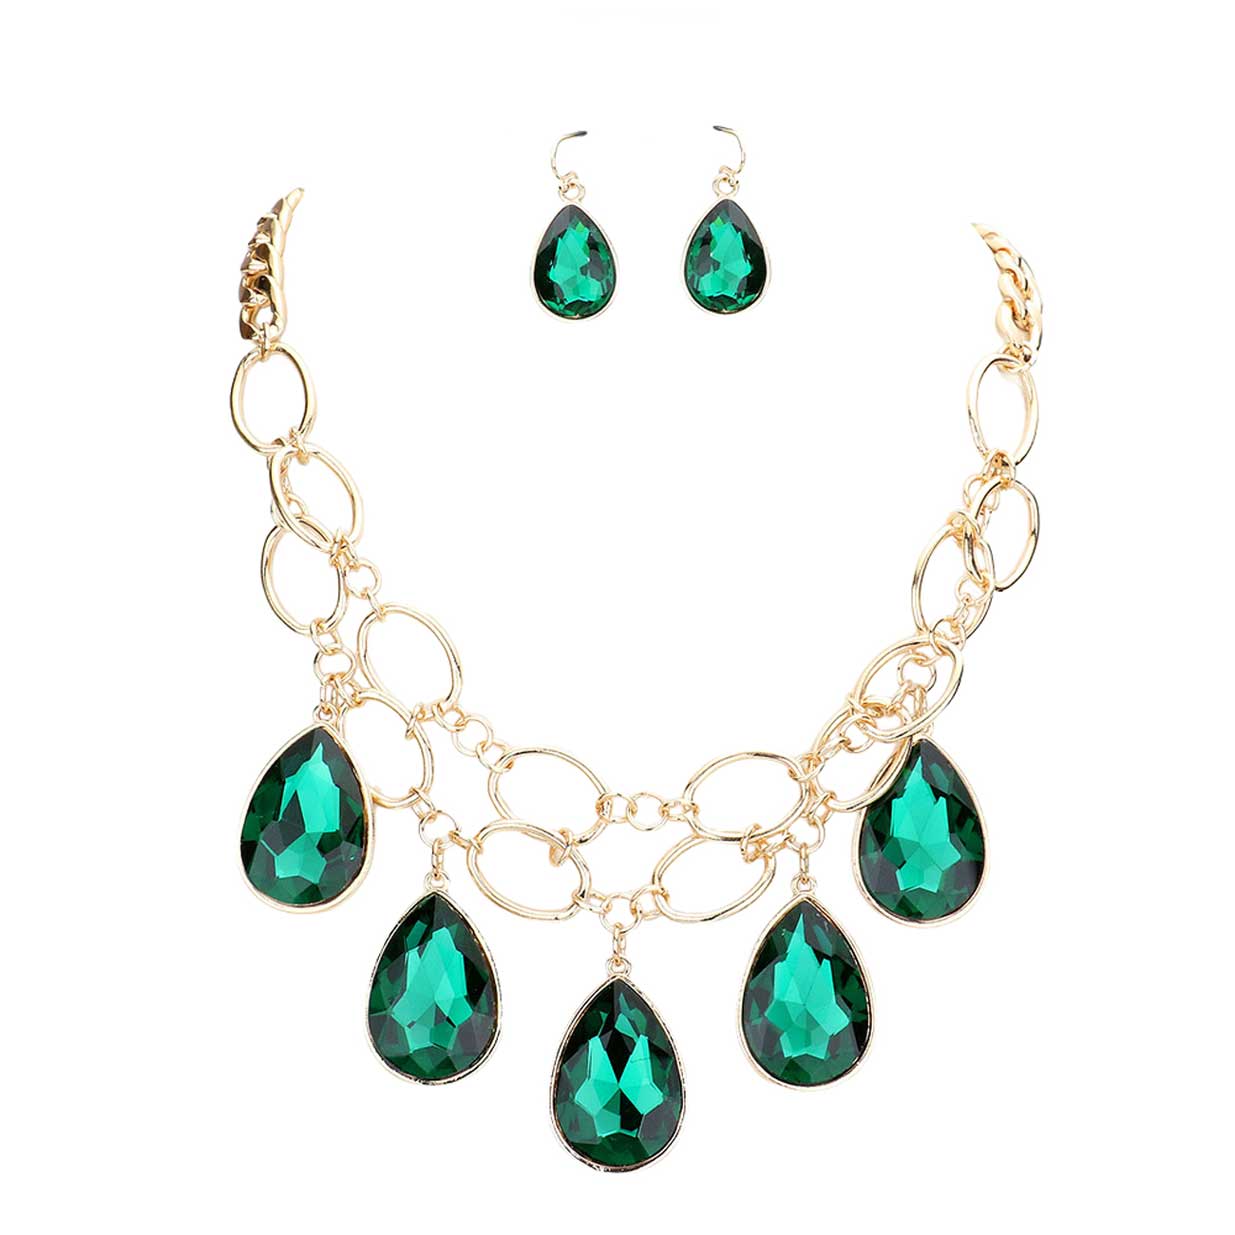 Emerald Teardrop Stone Accented Open Metal Oval Link Evening Necklace, this gorgeous jewelry set will show your class on any special occasion. The elegance of these stones goes unmatched, great for wearing at a party! stunning jewelry set will sparkle all night long making you shine like a diamond on special occasions. Perfect jewelry to enhance your look and for wearing at parties, weddings, date nights, or any special event.